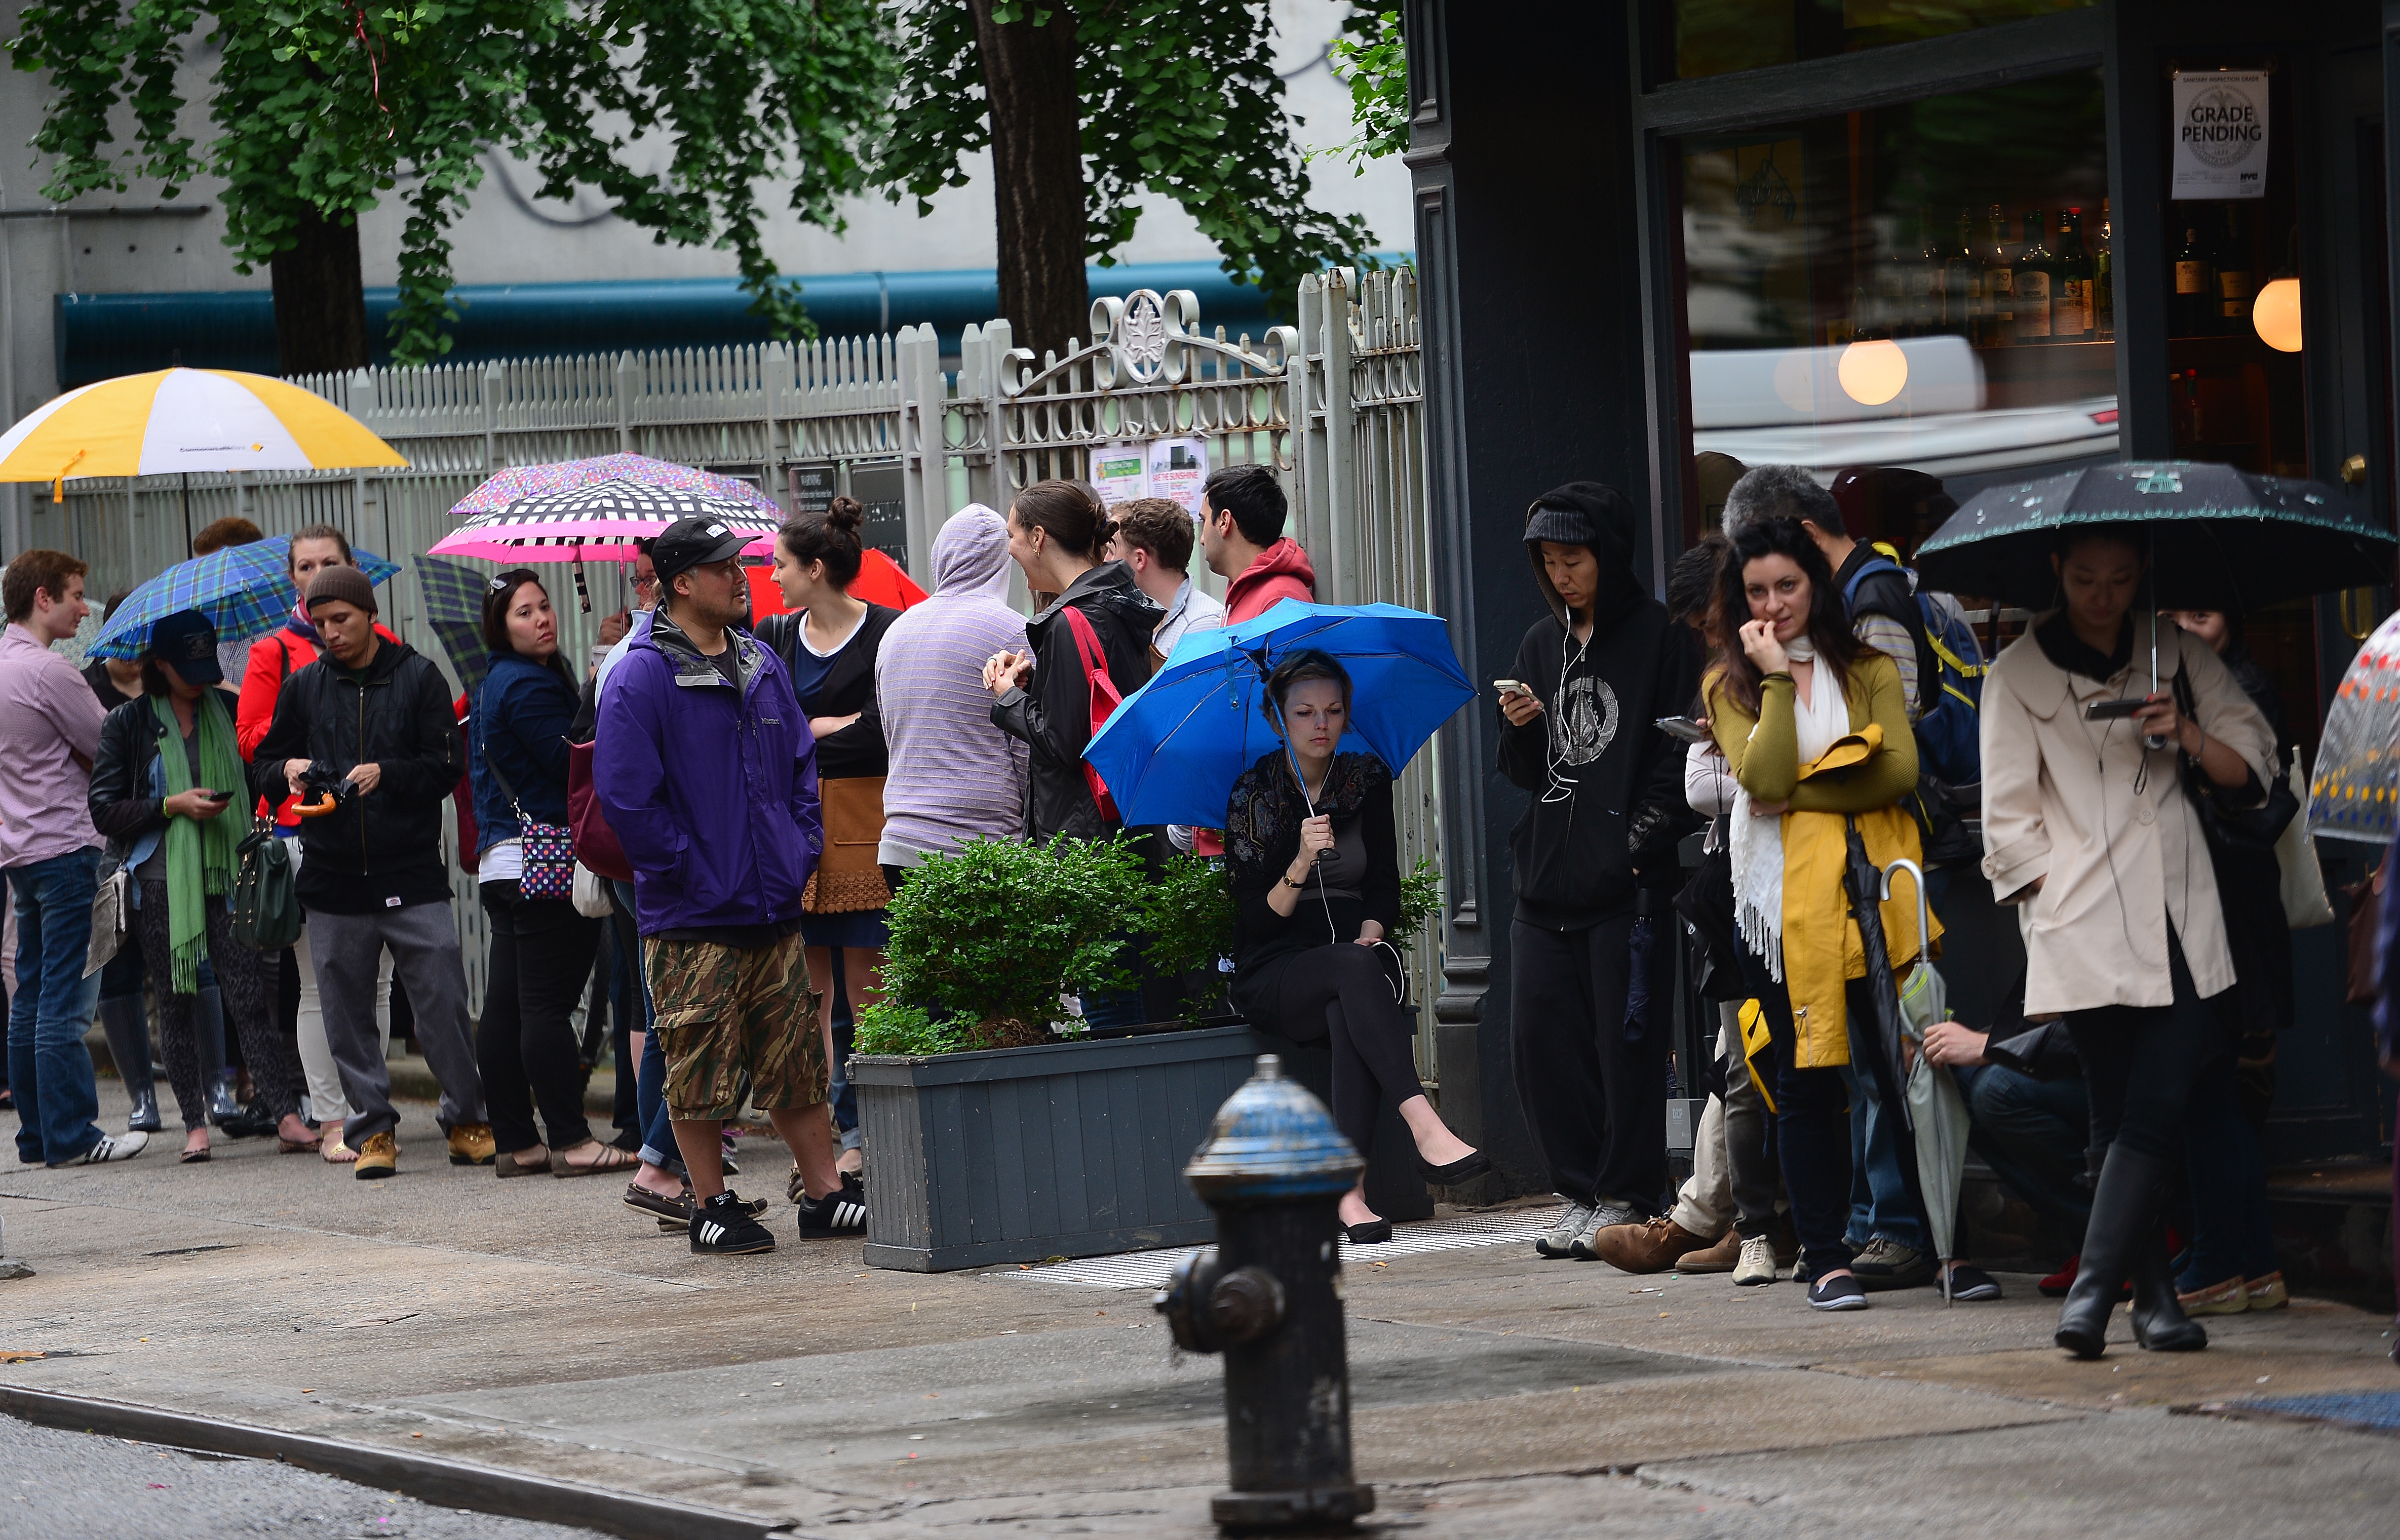 Customers wait in line to buy cronuts (credit: EMMANUEL DUNAND/AFP/Getty Images)